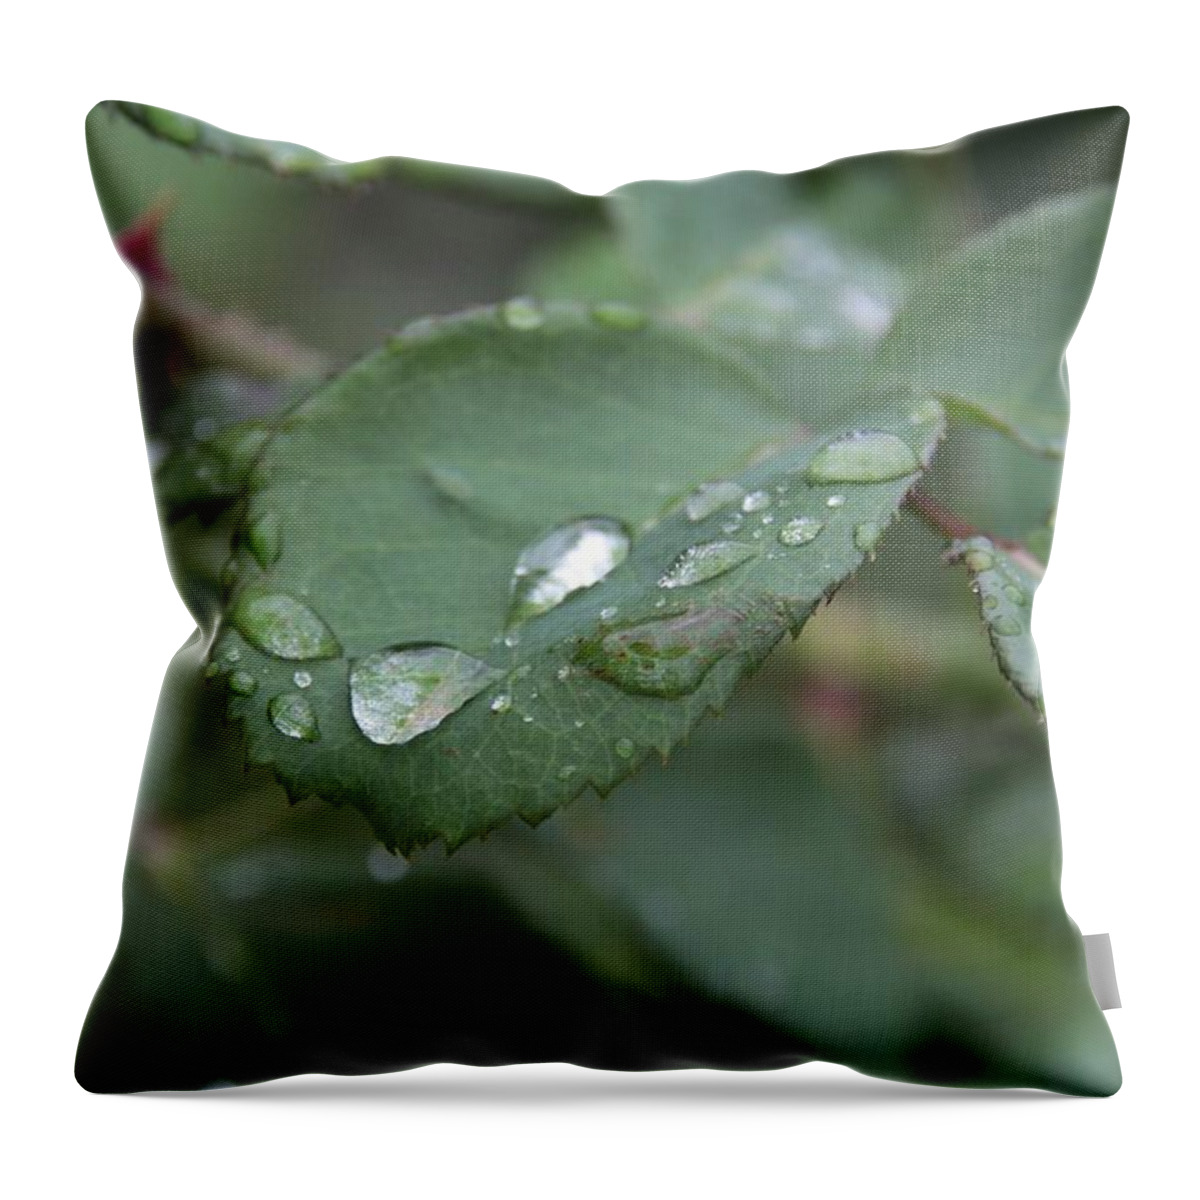 Photo Throw Pillow featuring the photograph Gocce by Giovanni Marco Sassu